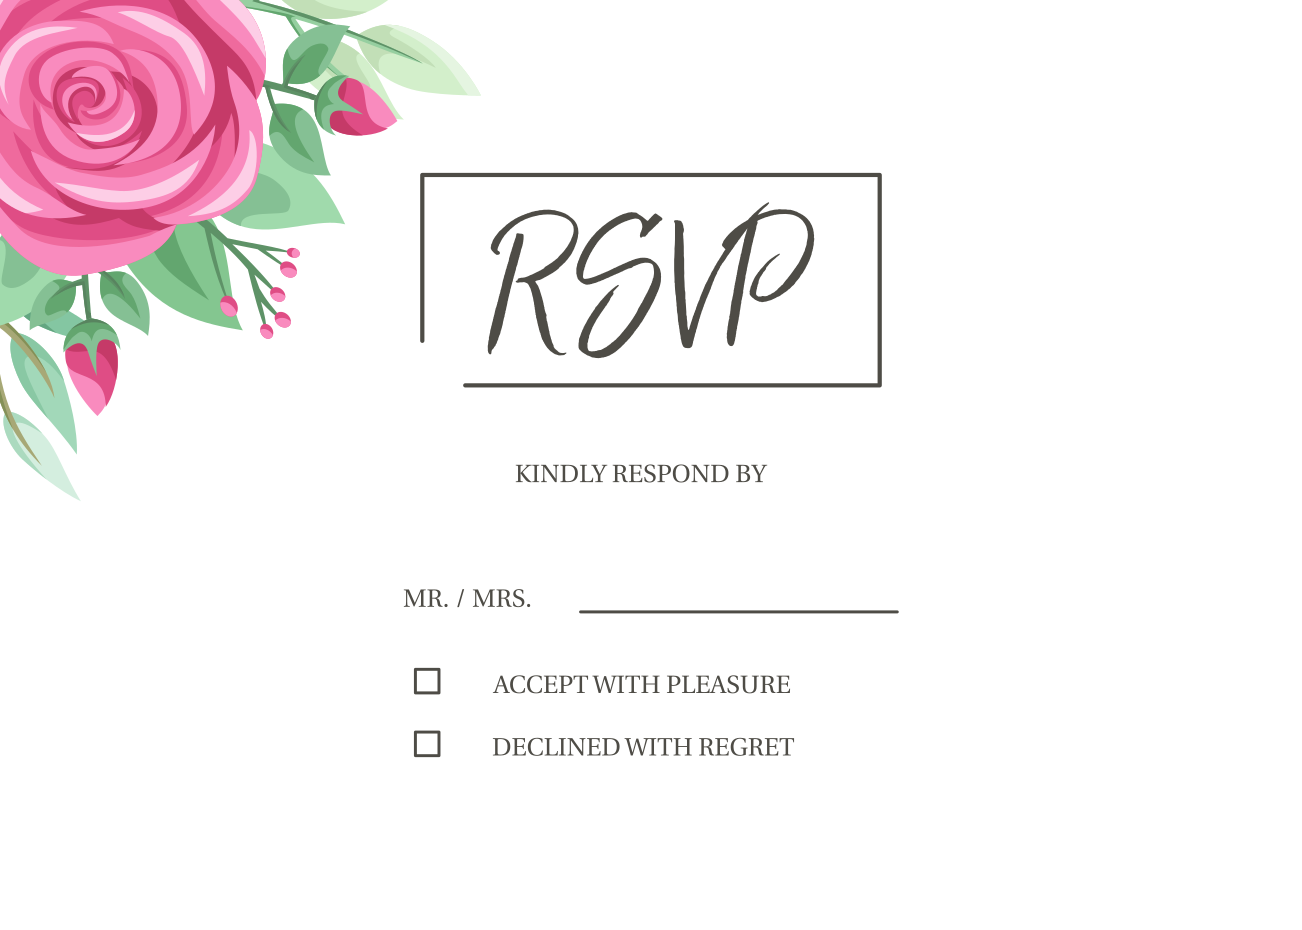 Greenery Wedding Invitation Template With Rose Ornament RSVP Example.